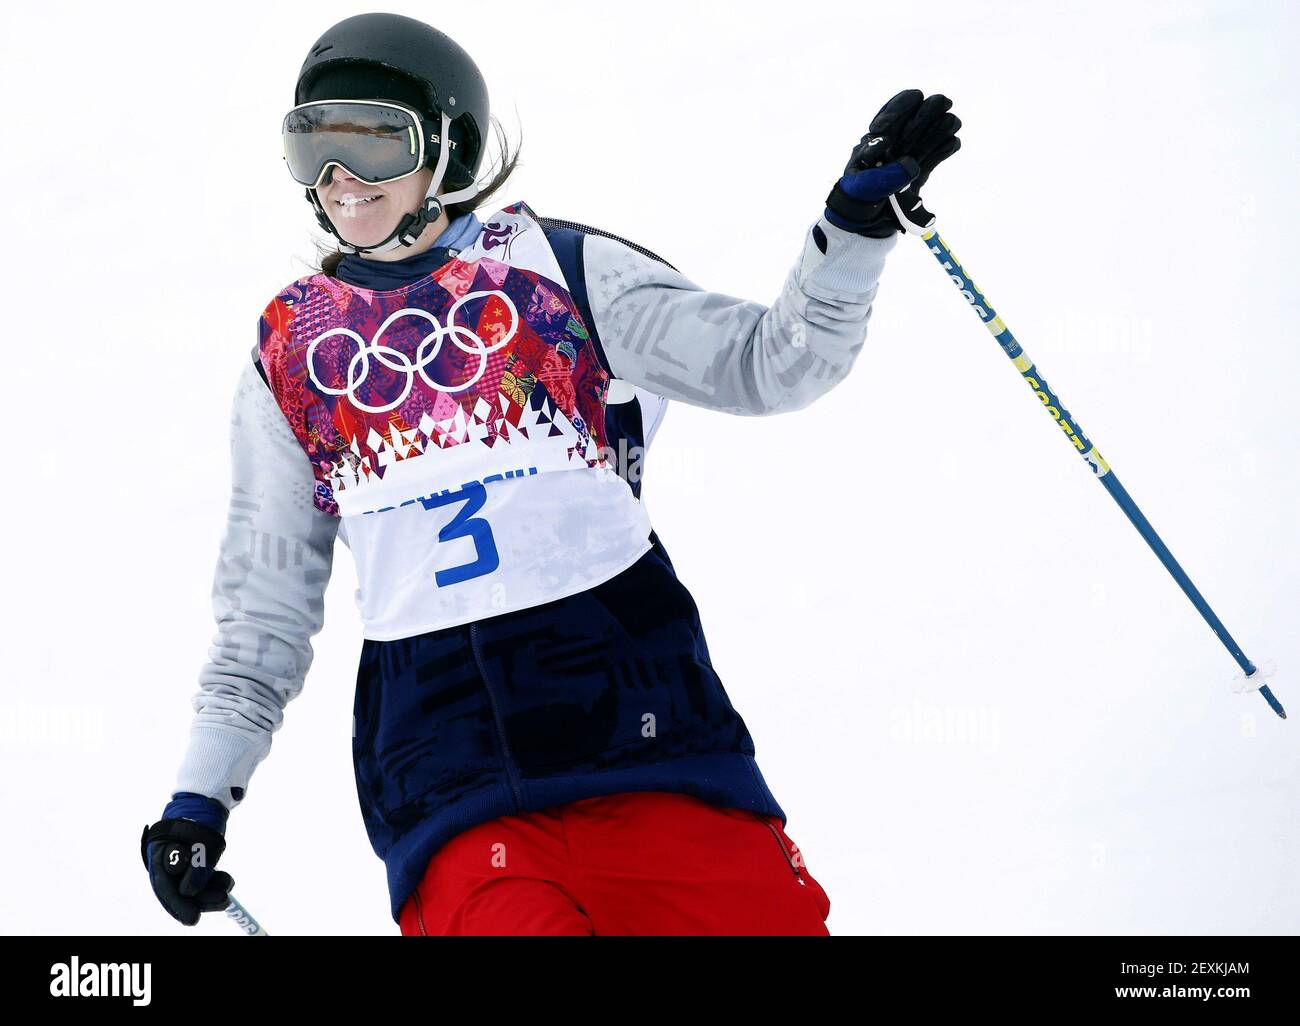 USA's Keri Herman after her second run in the ladies' ski slopestyle at the Rosa Khutor Extreme Park during the Winter Olympics in Sochi, Russia, Tuesday, Feb. 11, 2014. (Photo by Carlos Gonzalez/Minneapolis Star Tribune/MCT/Sipa USA) Stock Photo